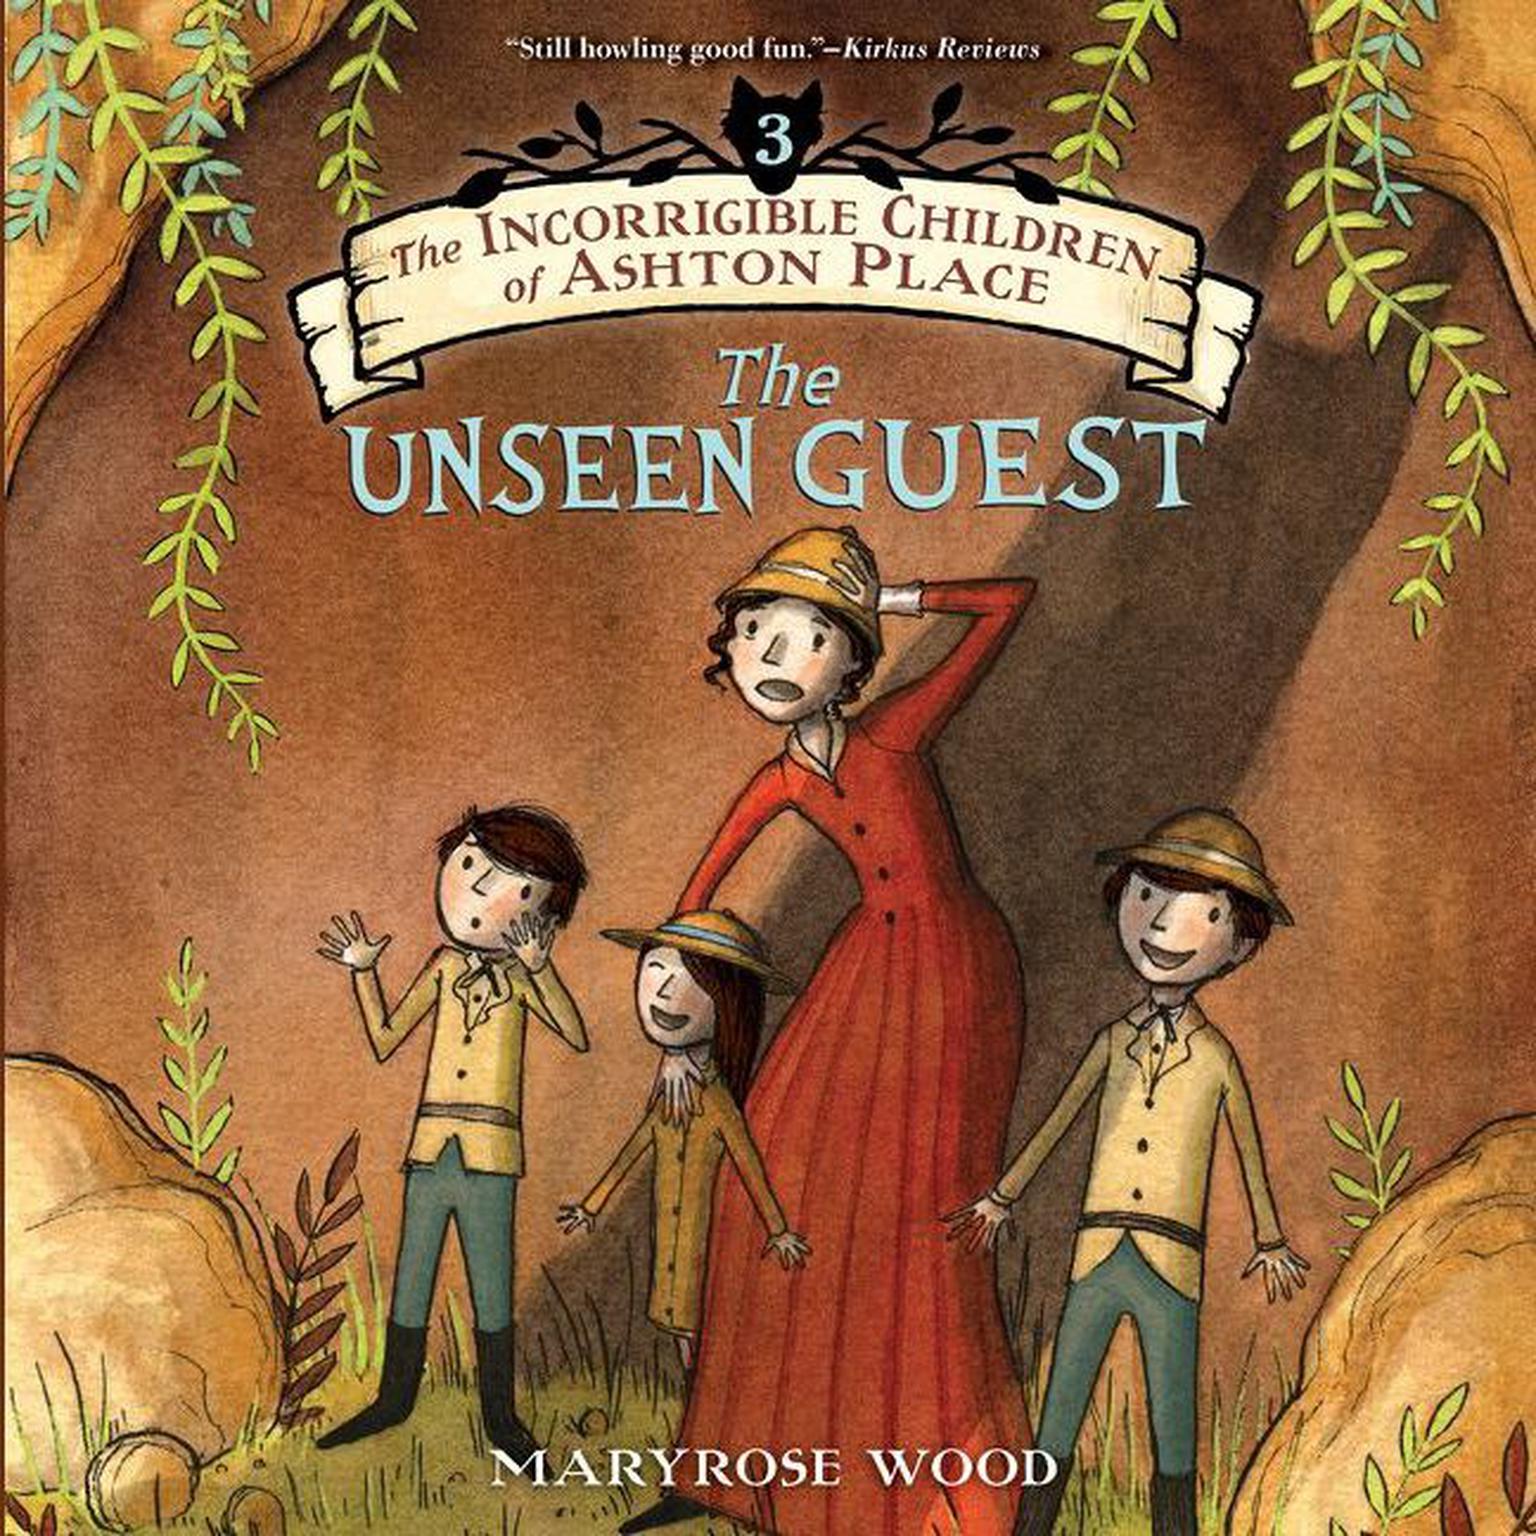 The Incorrigible Children of Ashton Place: Book III Audiobook, by Maryrose Wood